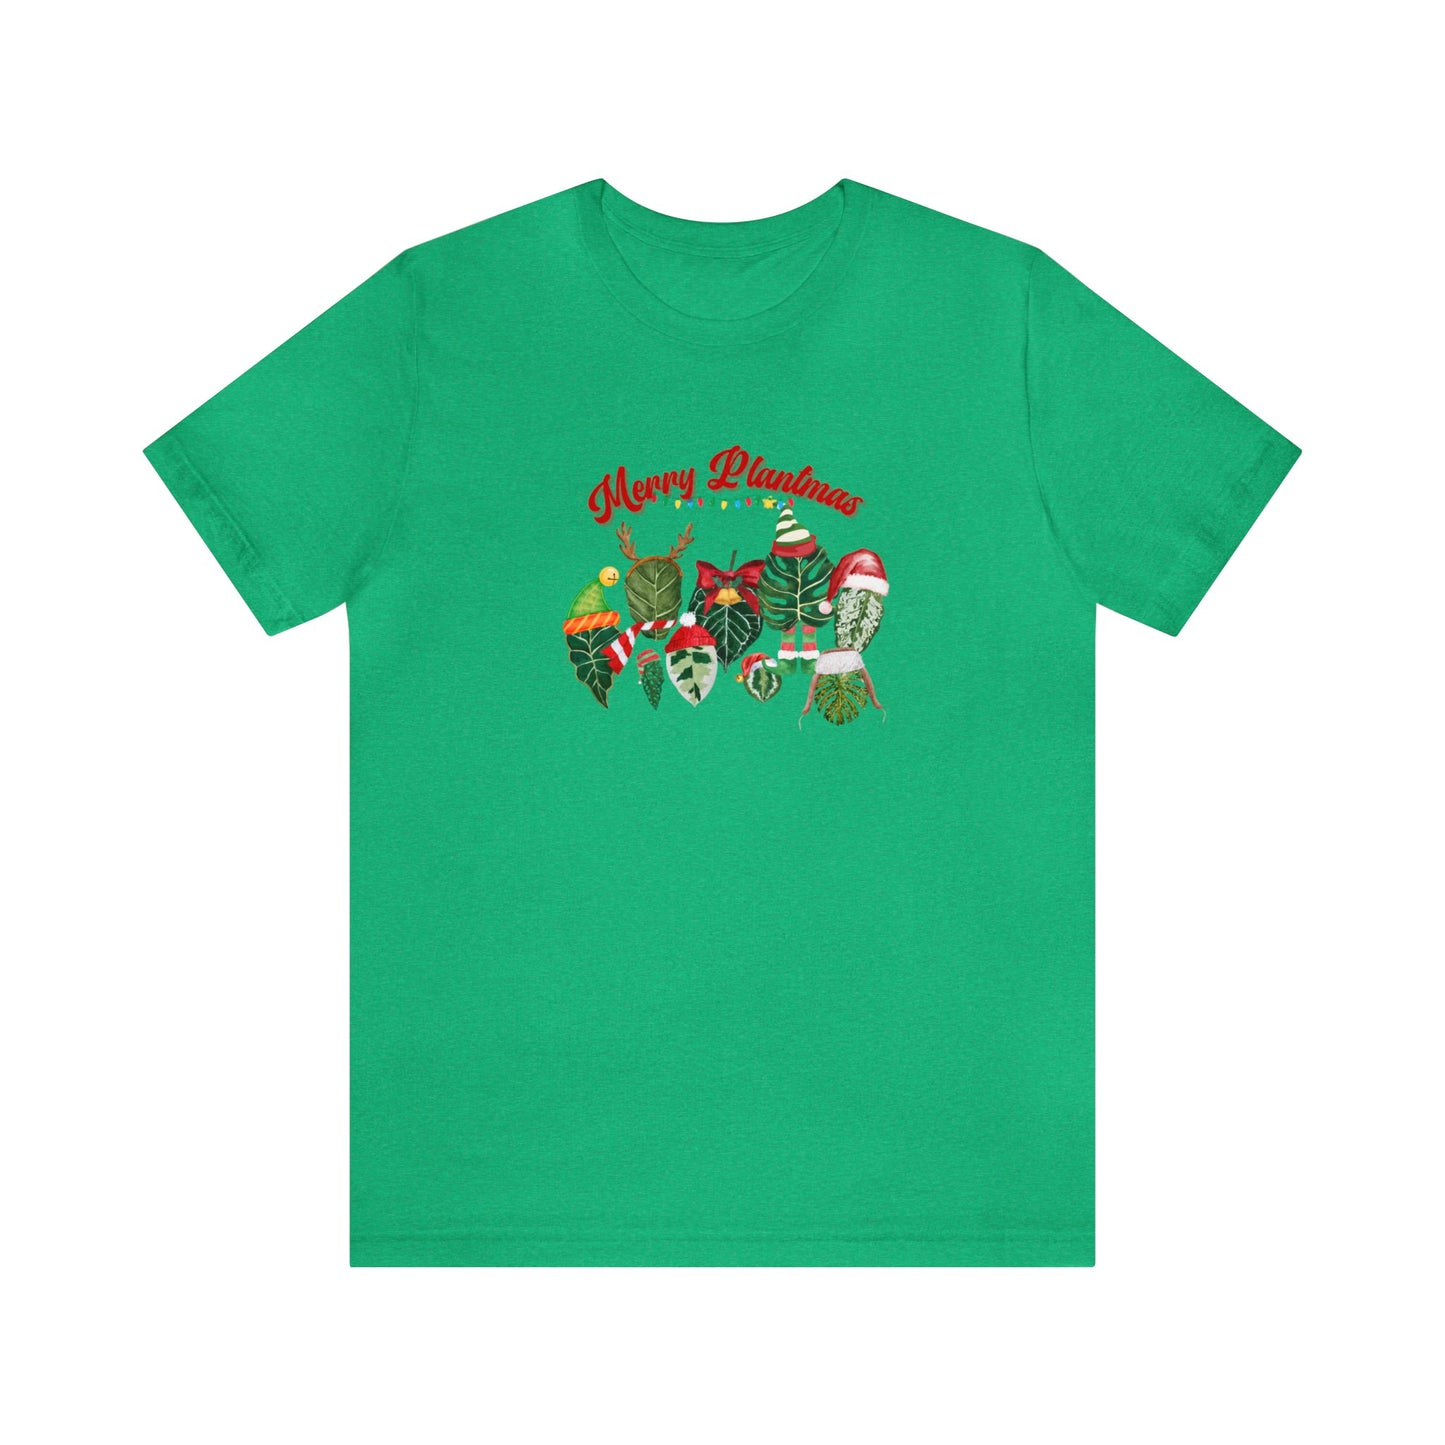 Ugly Christmas Sweater for plant lady or plant daddy. Merry Plantmas tshirt for plant lover and Christmas season. Funny plant tshirt